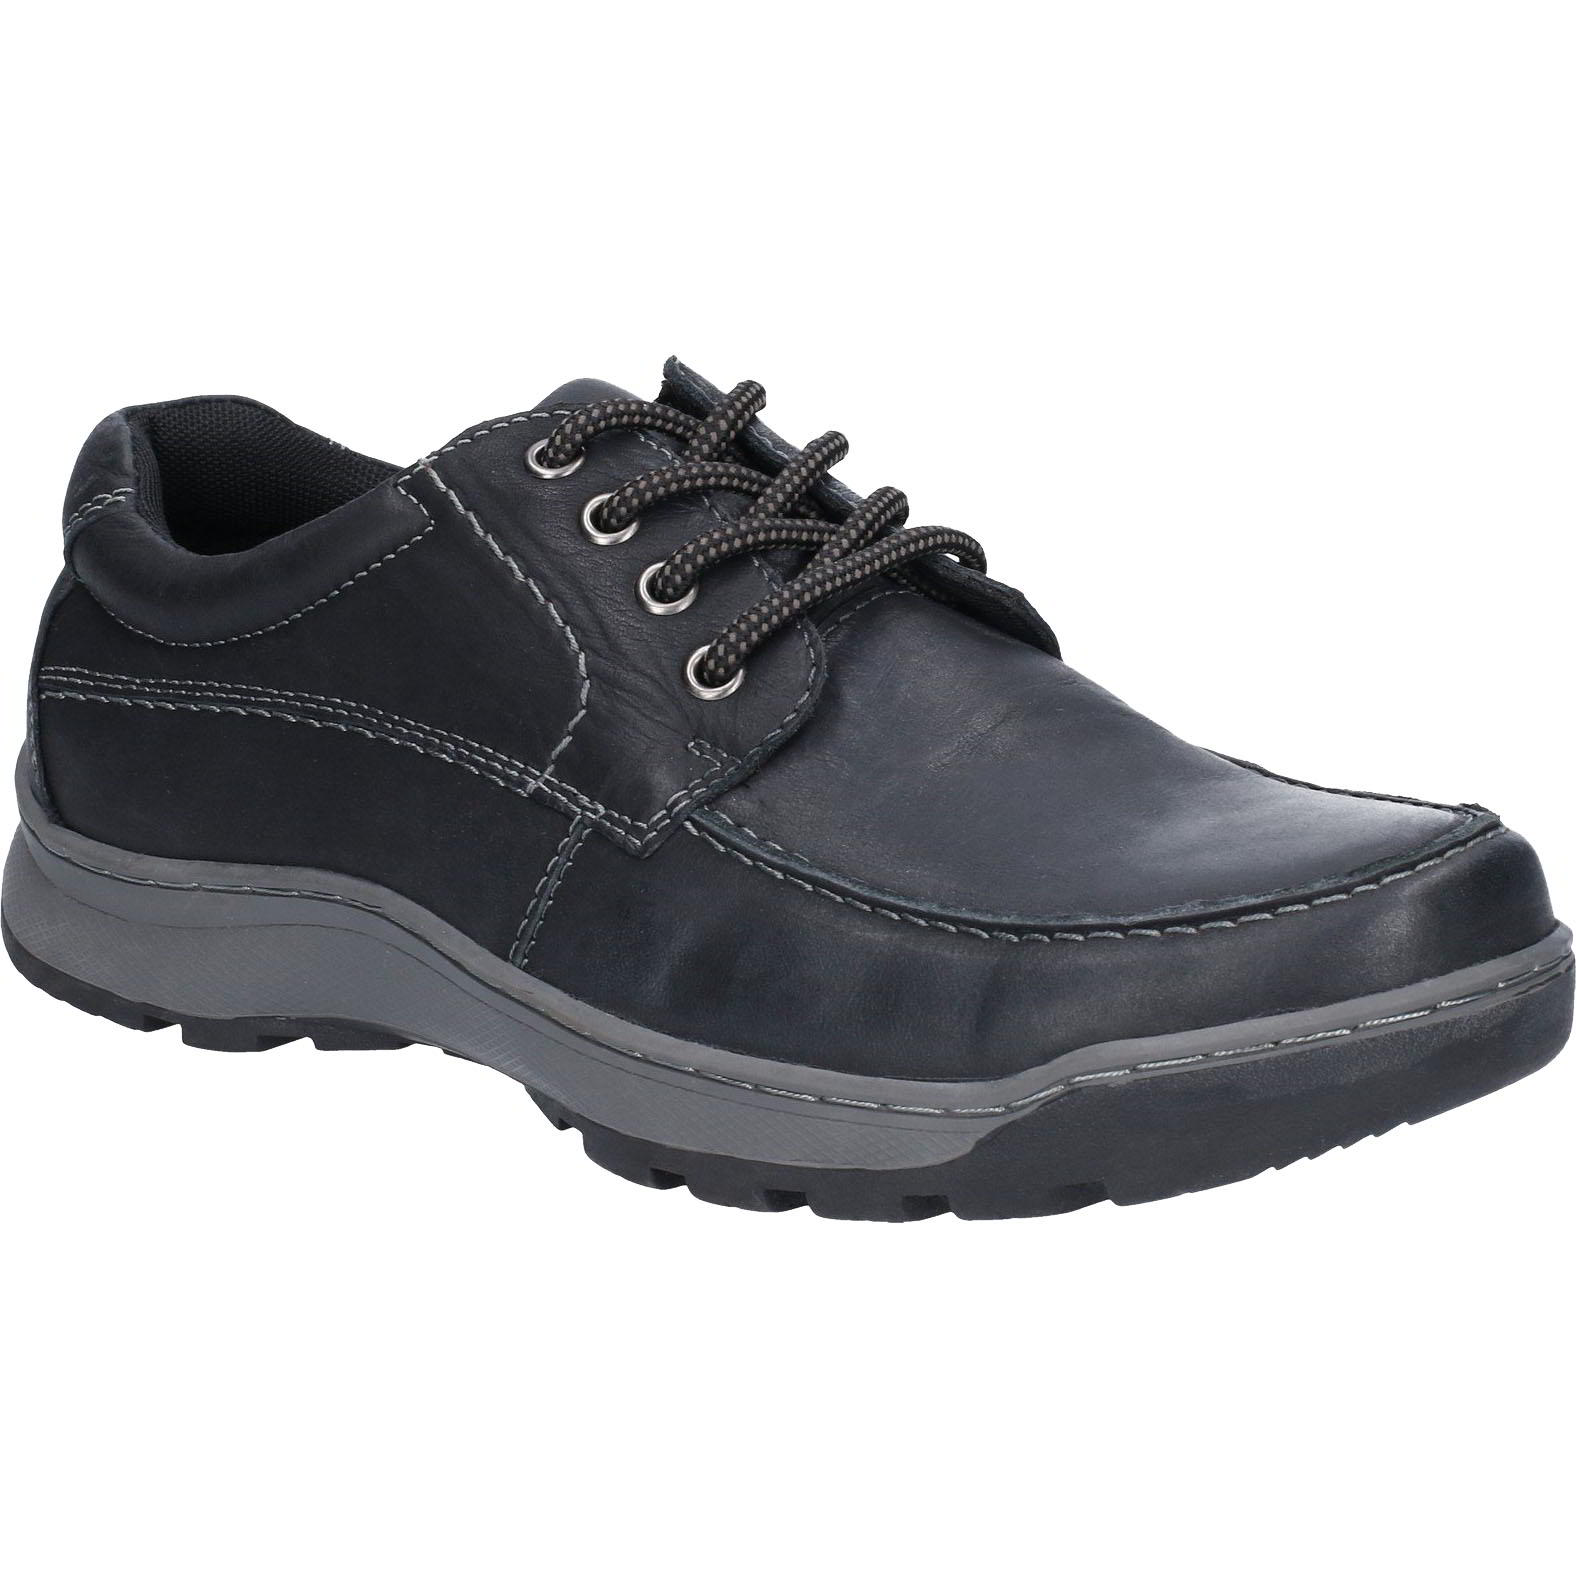 Hush Puppies Men's Tucker Leather Lace Up Shoes - Black - UK 12